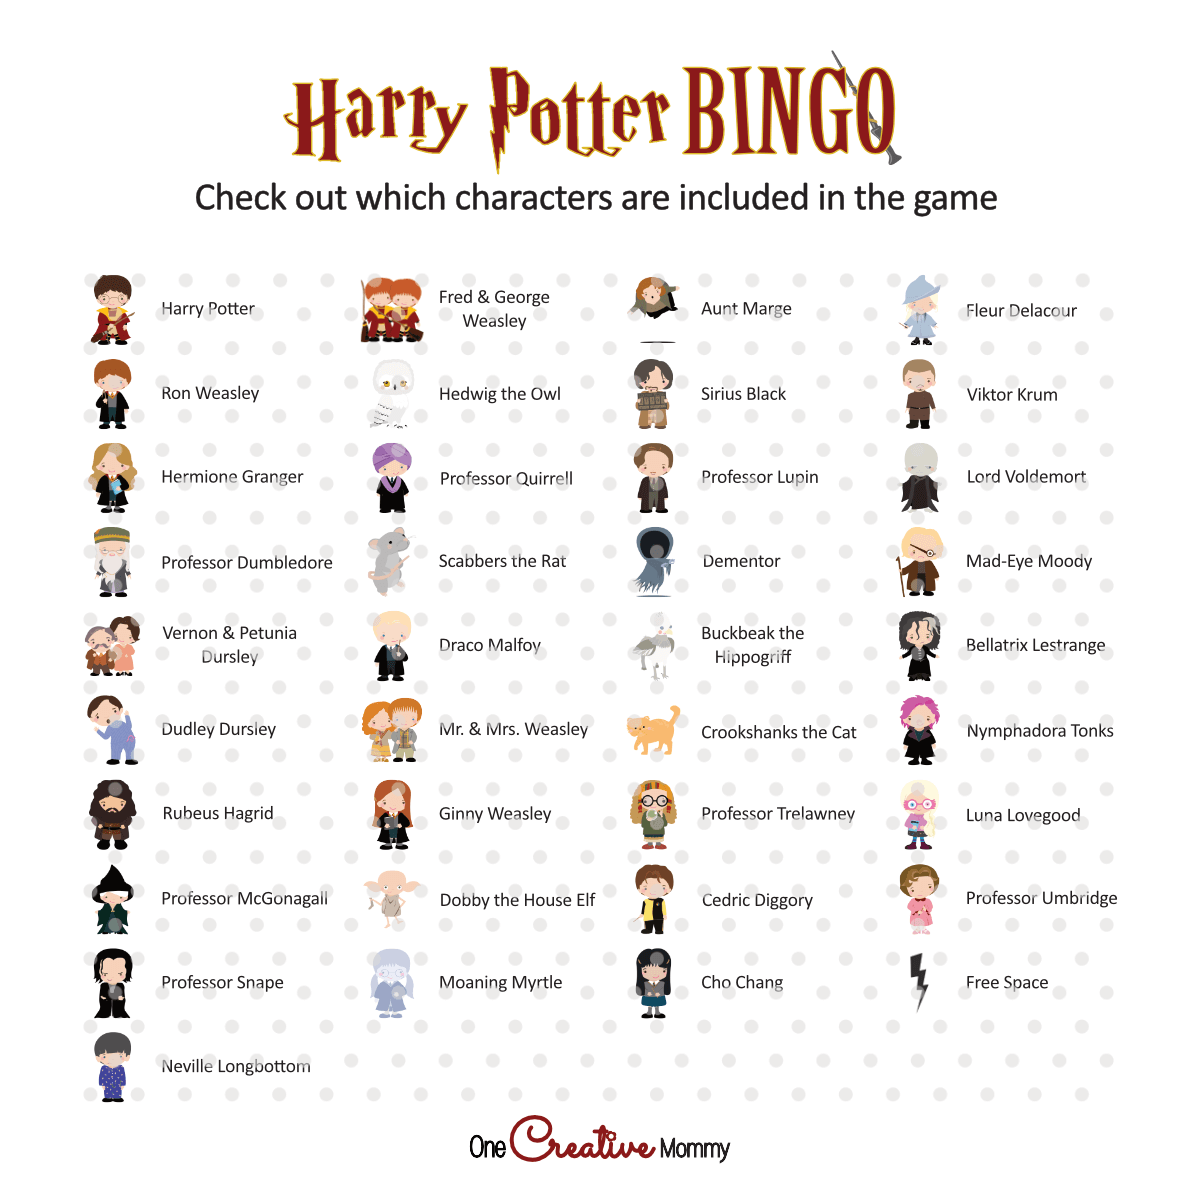 Image of all the characters included in the bingo game